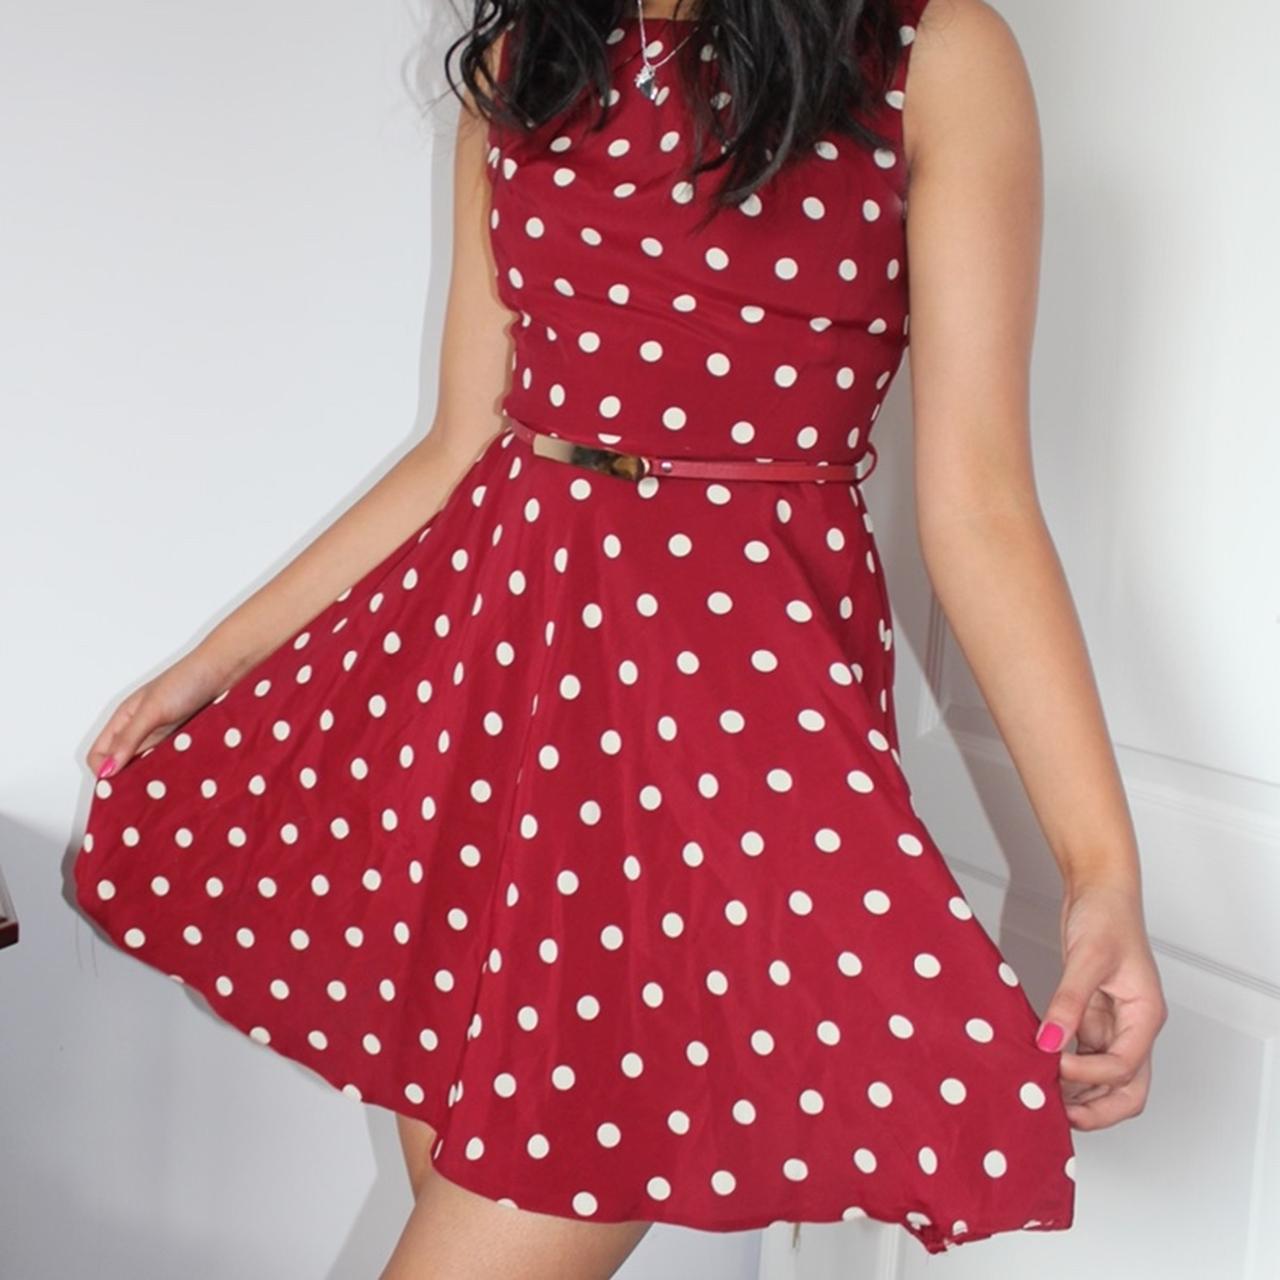 Product Image 1 - Red and white polka dot